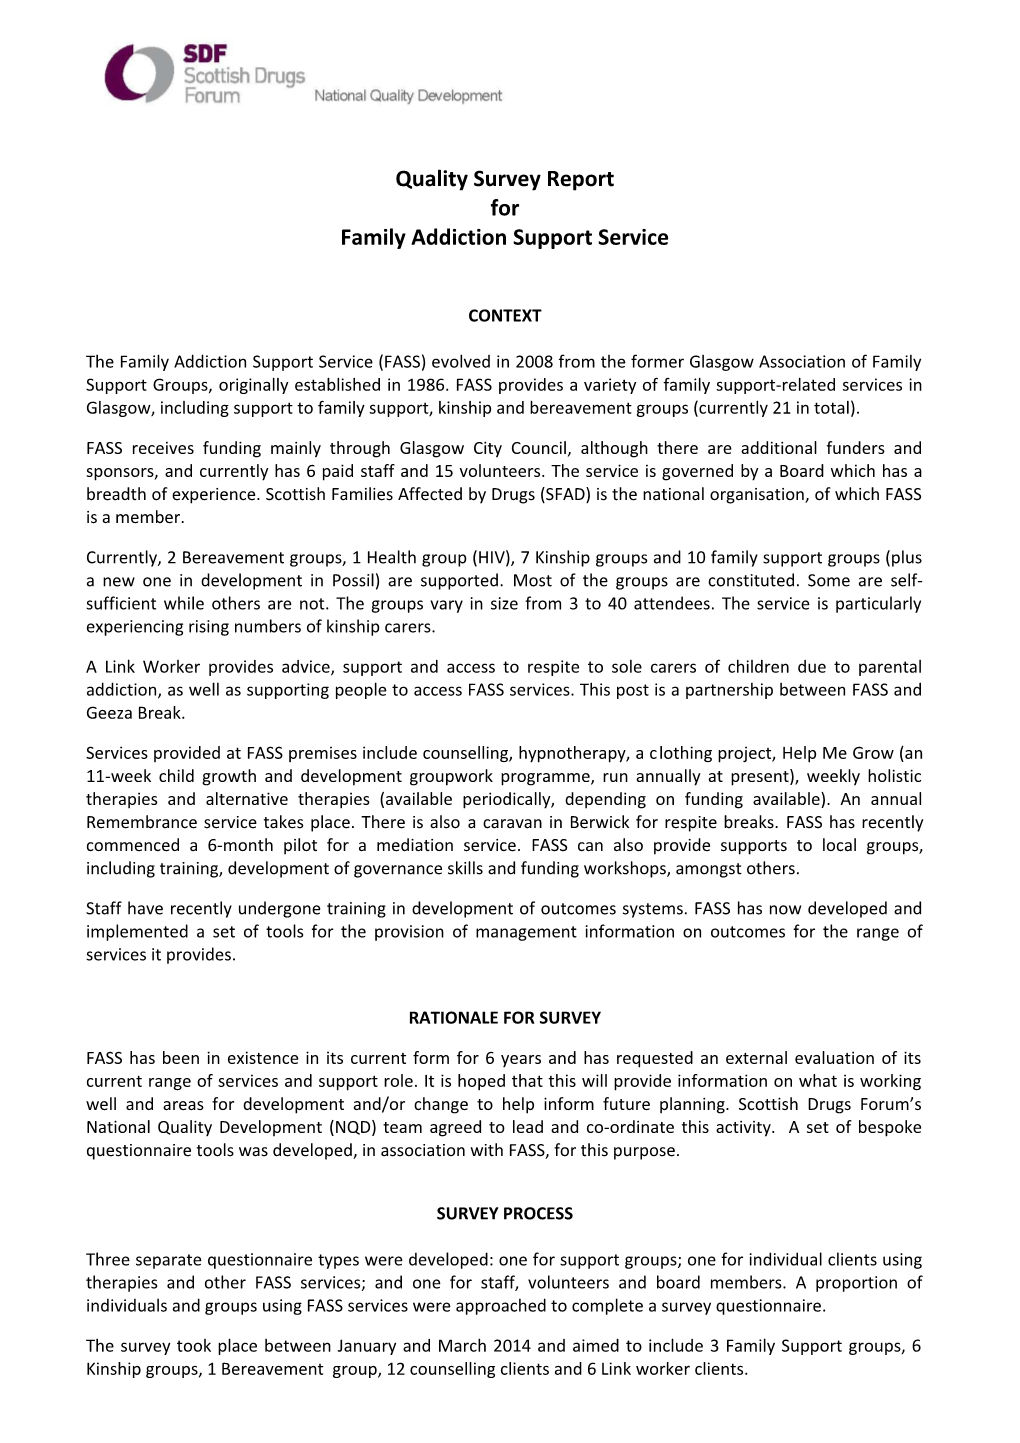 Family Addiction Support Service